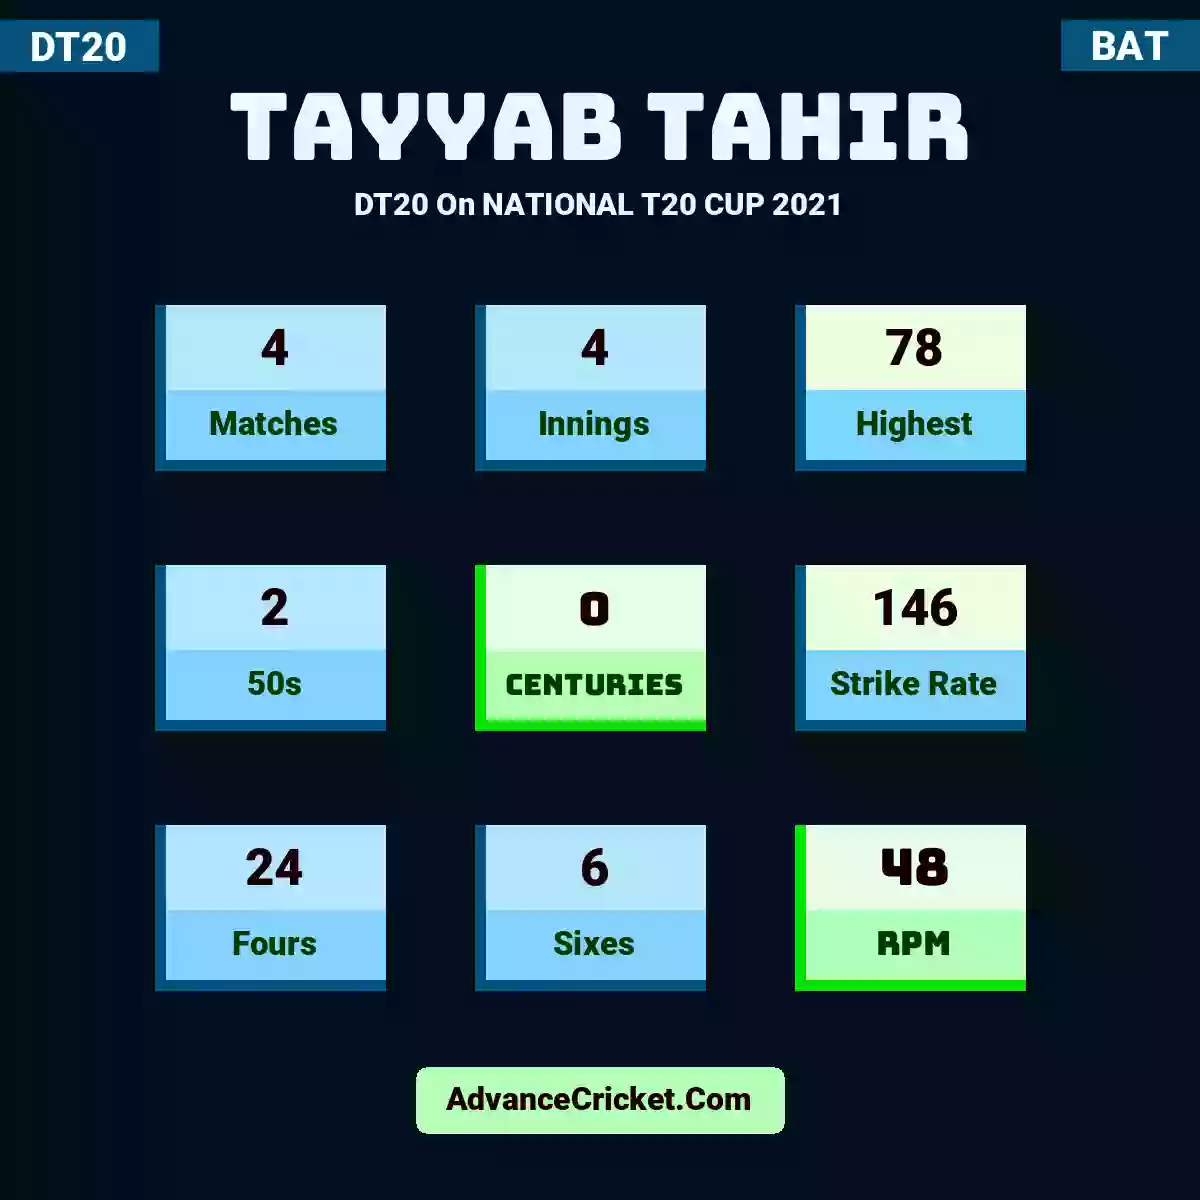 Tayyab Tahir DT20  On NATIONAL T20 CUP 2021, Tayyab Tahir played 4 matches, scored 78 runs as highest, 2 half-centuries, and 0 centuries, with a strike rate of 146. T.Tahir hit 24 fours and 6 sixes, with an RPM of 48.